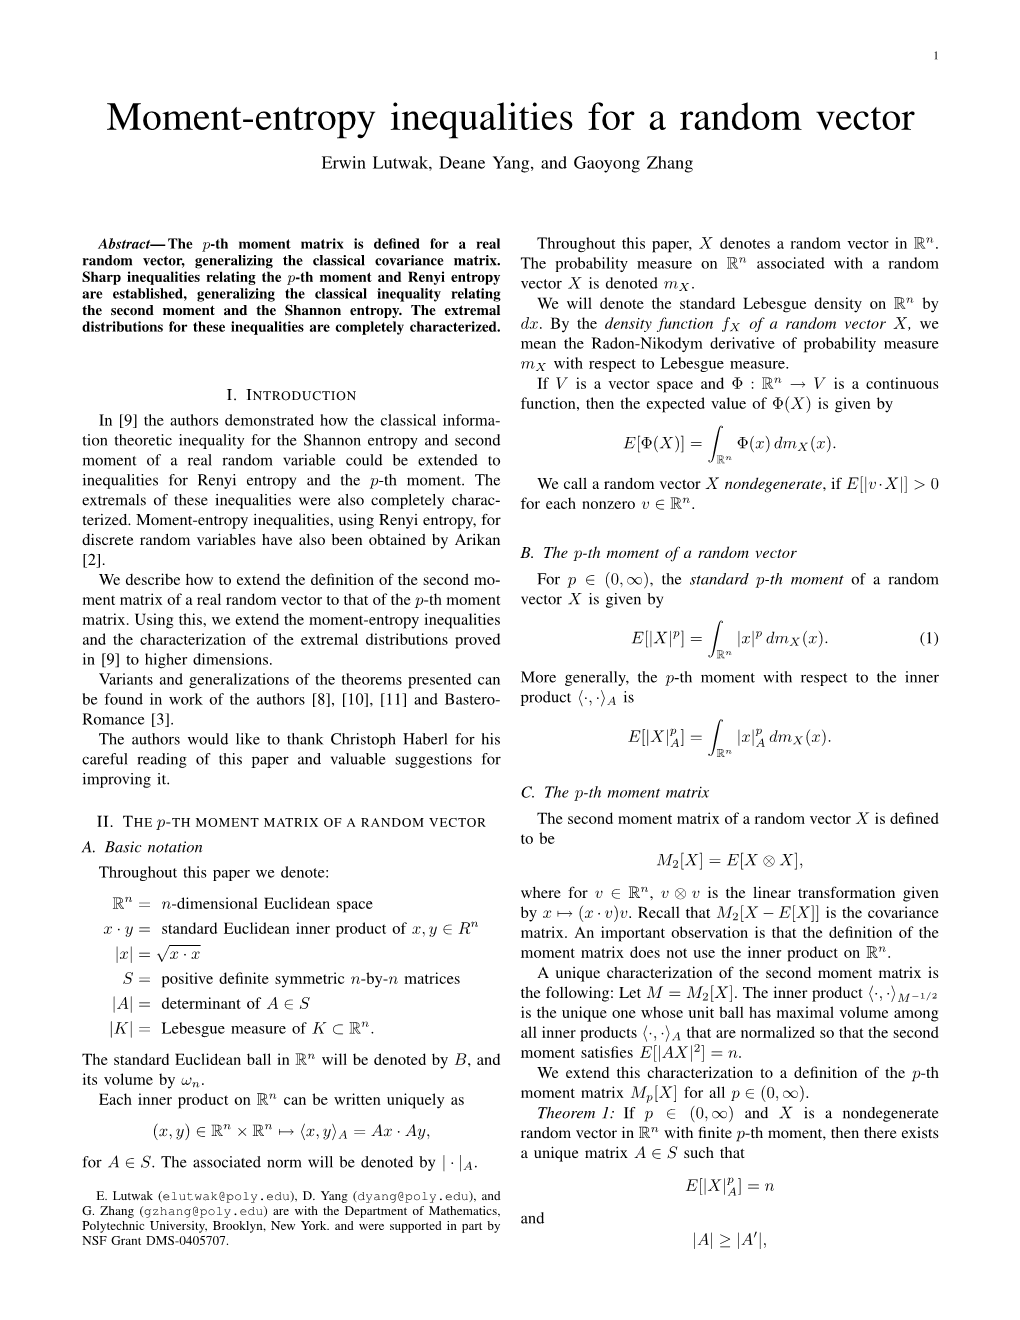 Moment-Entropy Inequalities for a Random Vector Erwin Lutwak, Deane Yang, and Gaoyong Zhang